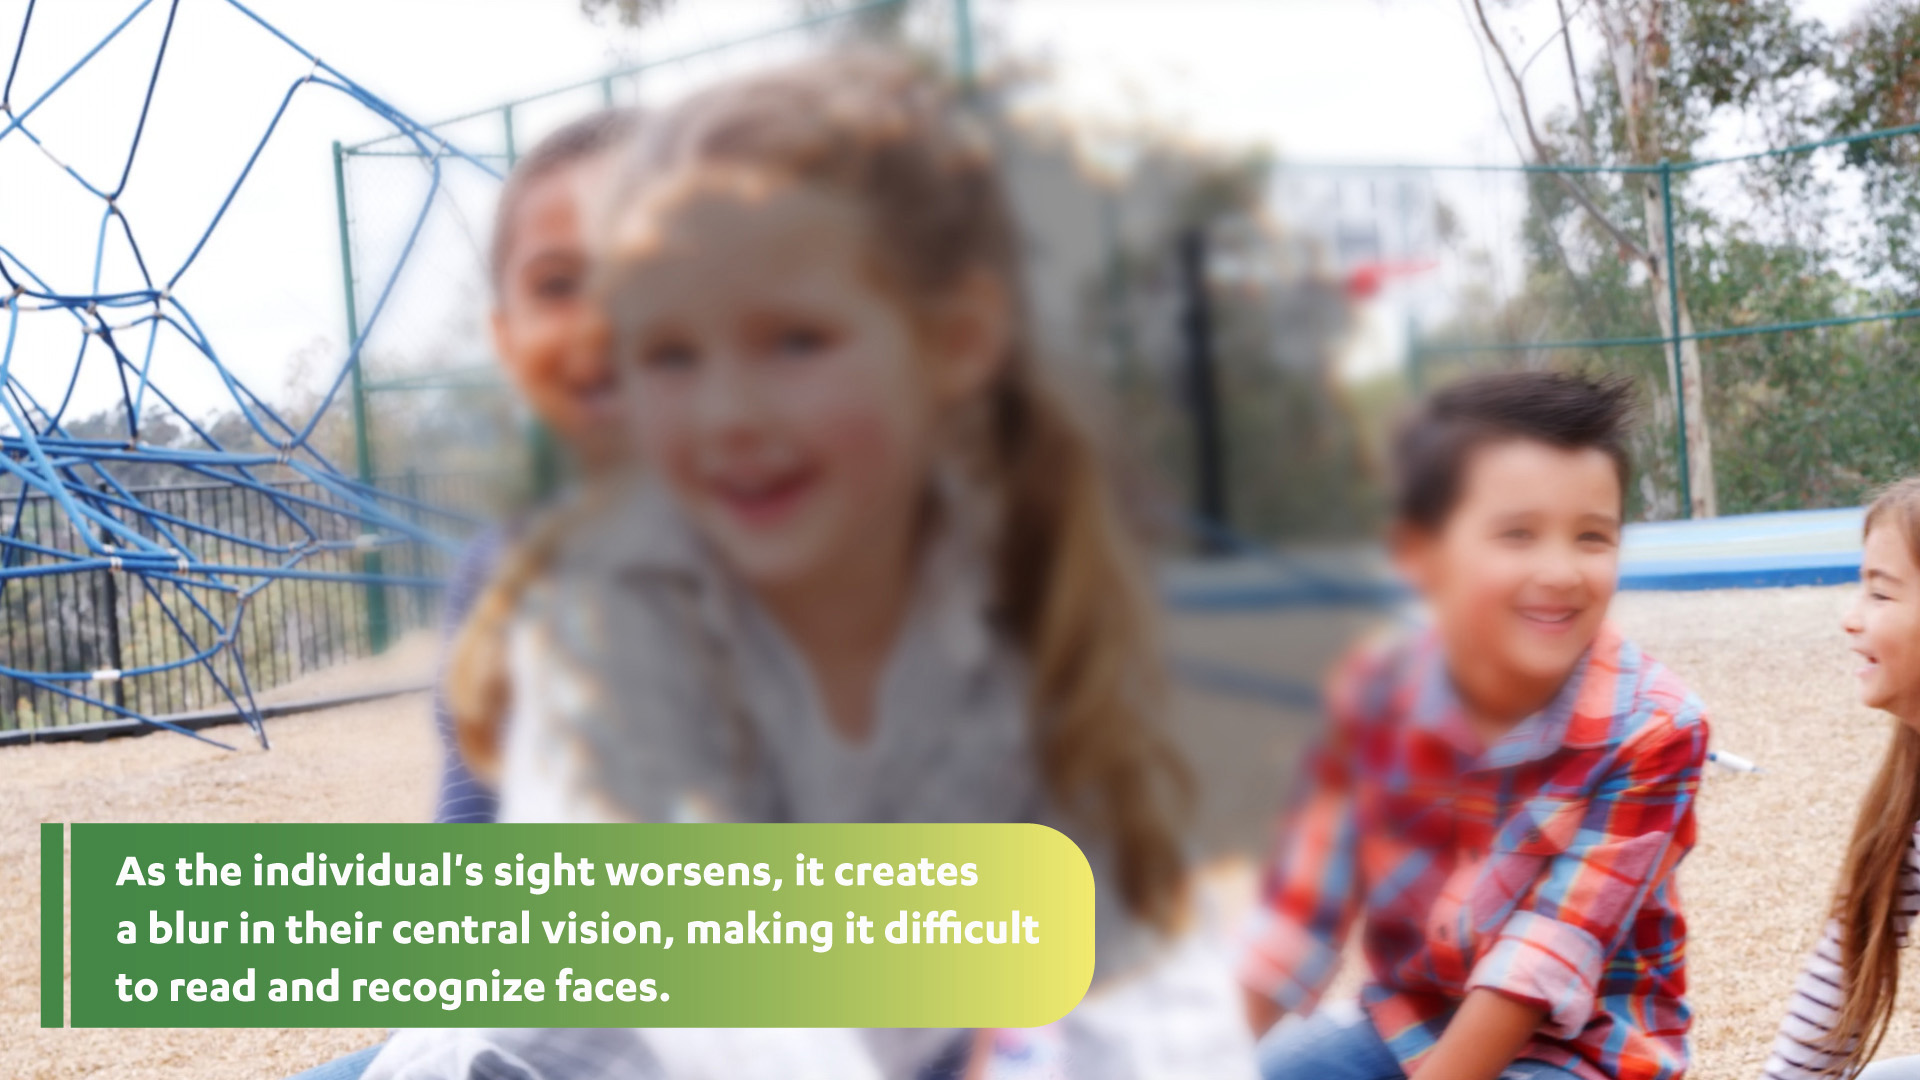 As the individual's sight worsens, it creates a blur in their central vision, making it difficult to read and recognize faces: Photo of young girl in a gray checkered shirt smiling with other children on a playground. The center of the image is blurred in gray making the girl's face difficult to see and showing the progression of central vision loss.